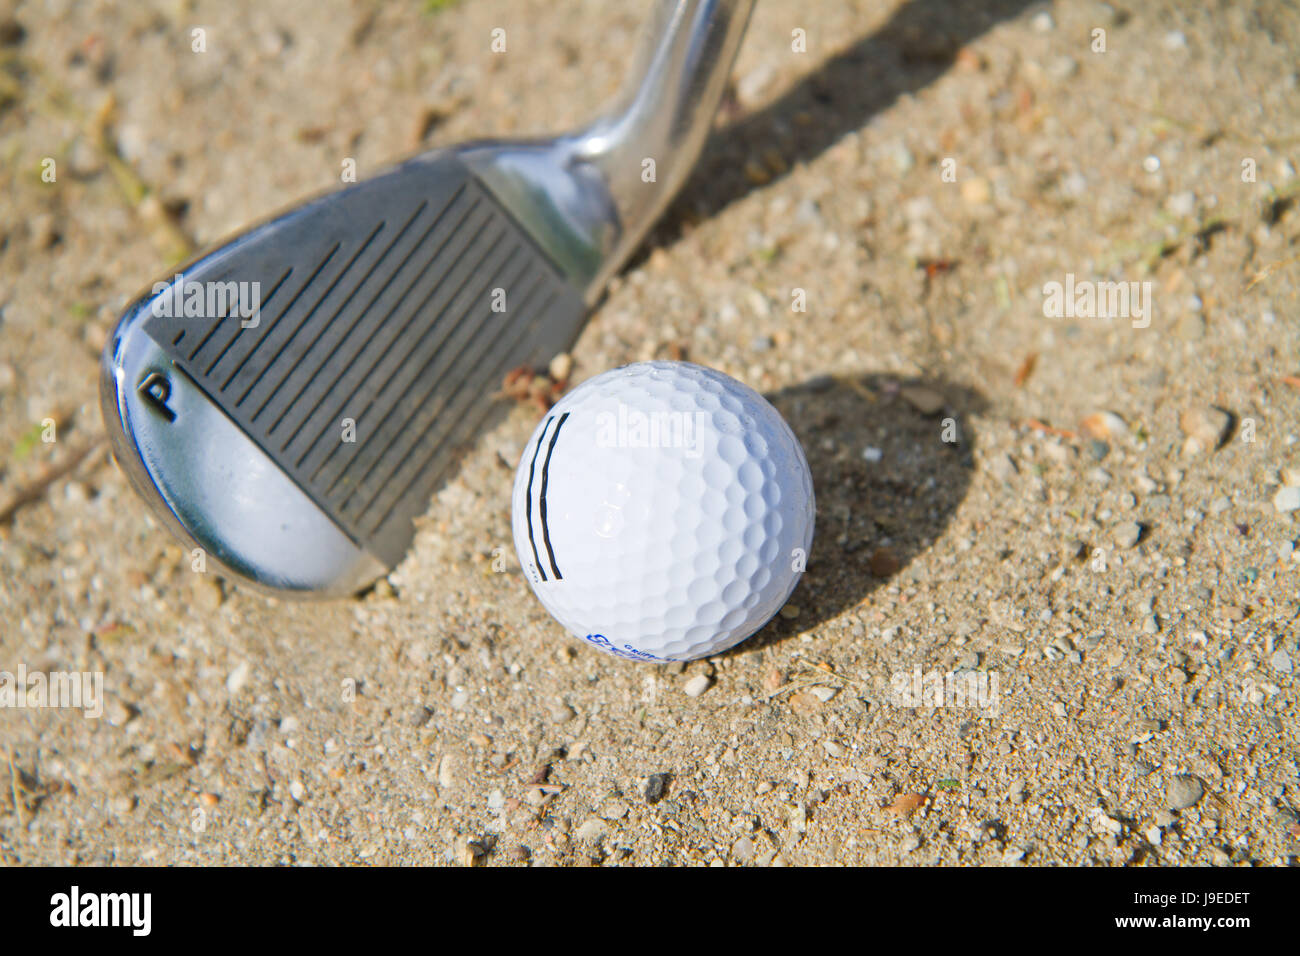 game, tournament, play, playing, plays, played, ball, lie, lying, lies, bunker, Stock Photo